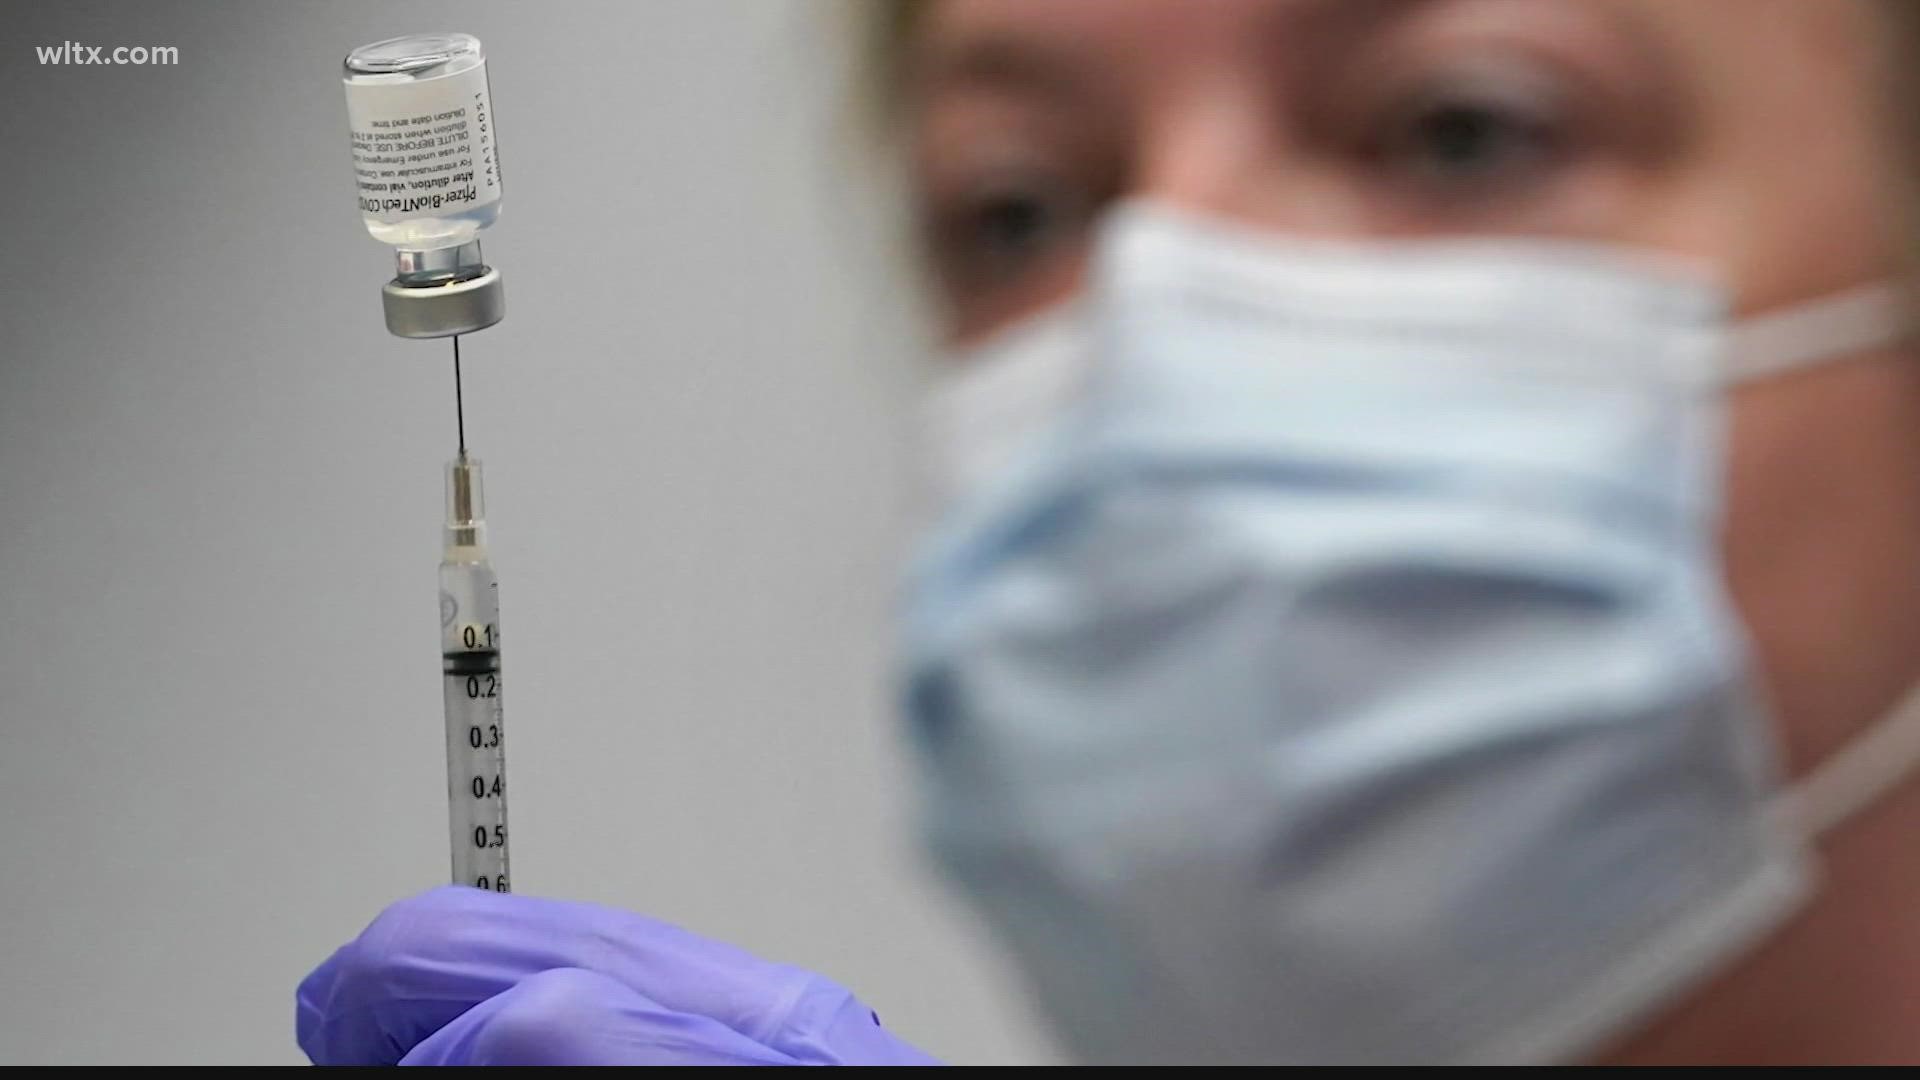 More businesses are considering mandating vaccines now that the Pfizer brand is FDA approved.